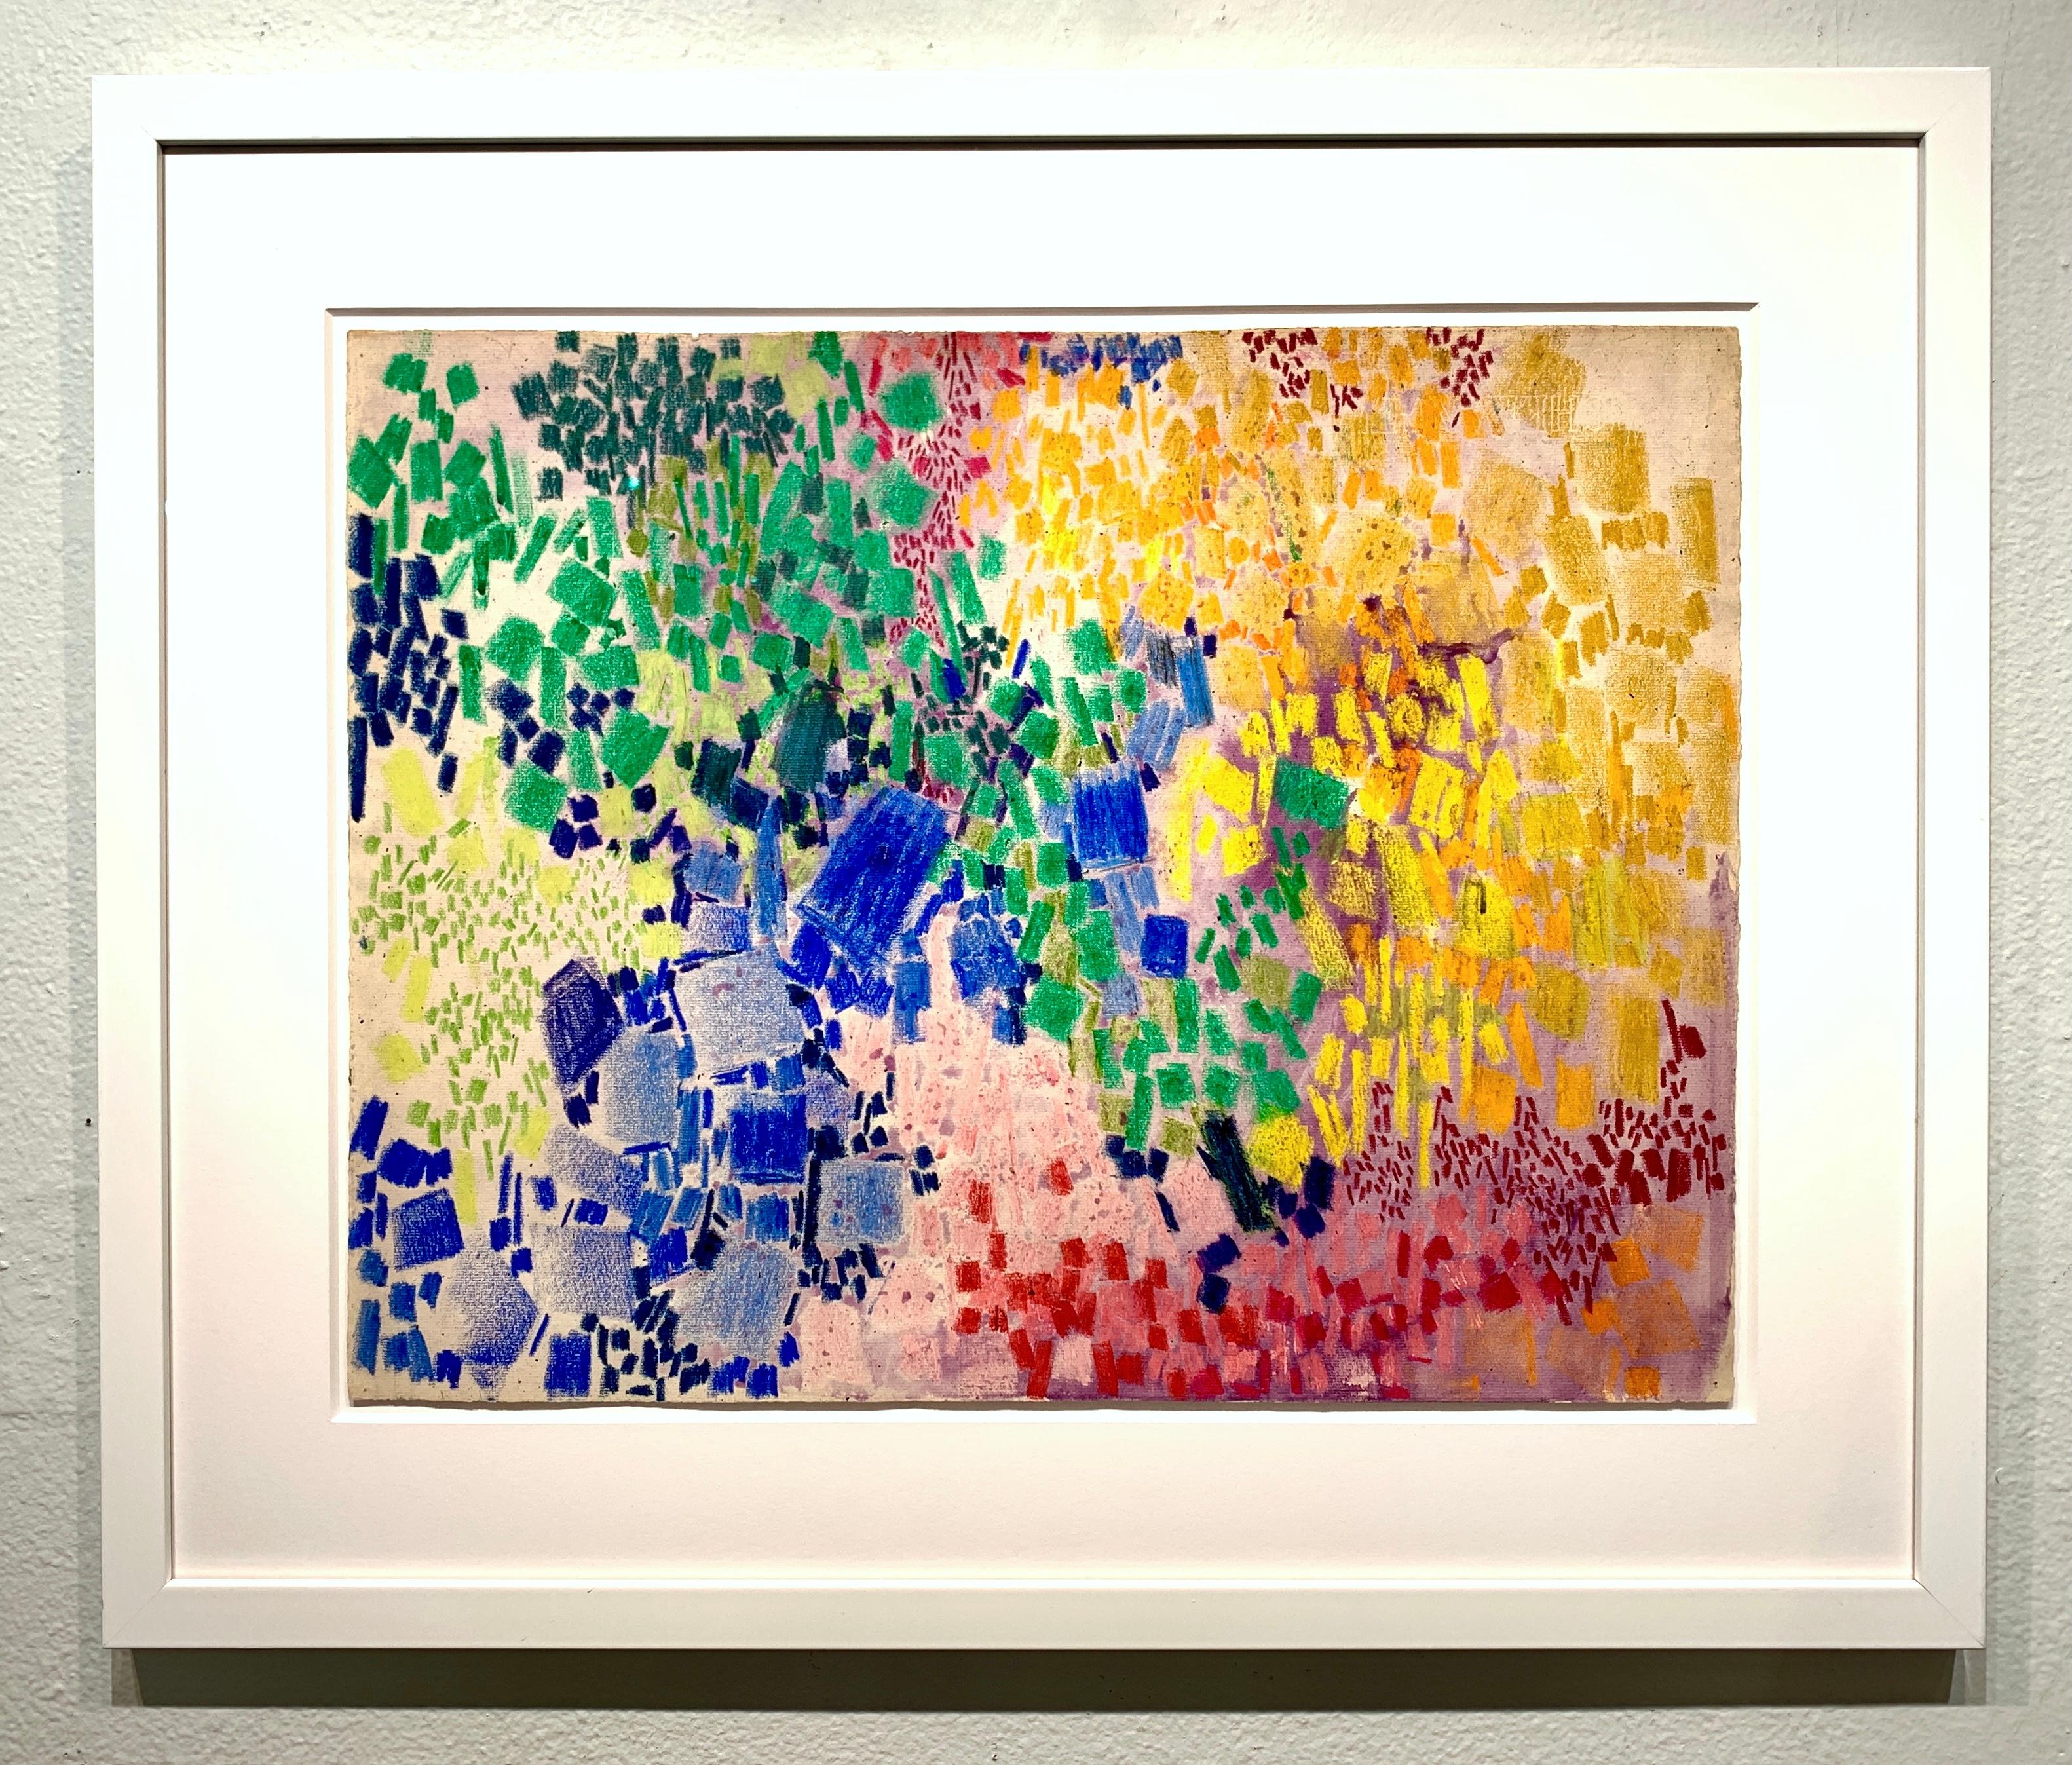 Untitled (Multicolor) 1960, by Lynne Mapp Drexler Mid-Century Abstract Expressionist on Paper

Provenance:  Drexler Estate

LYNNE MAPP DREXLER (American, 1928-1999)

Southern-born Lynne Mapp Drexler found her artistic voice during one of the most